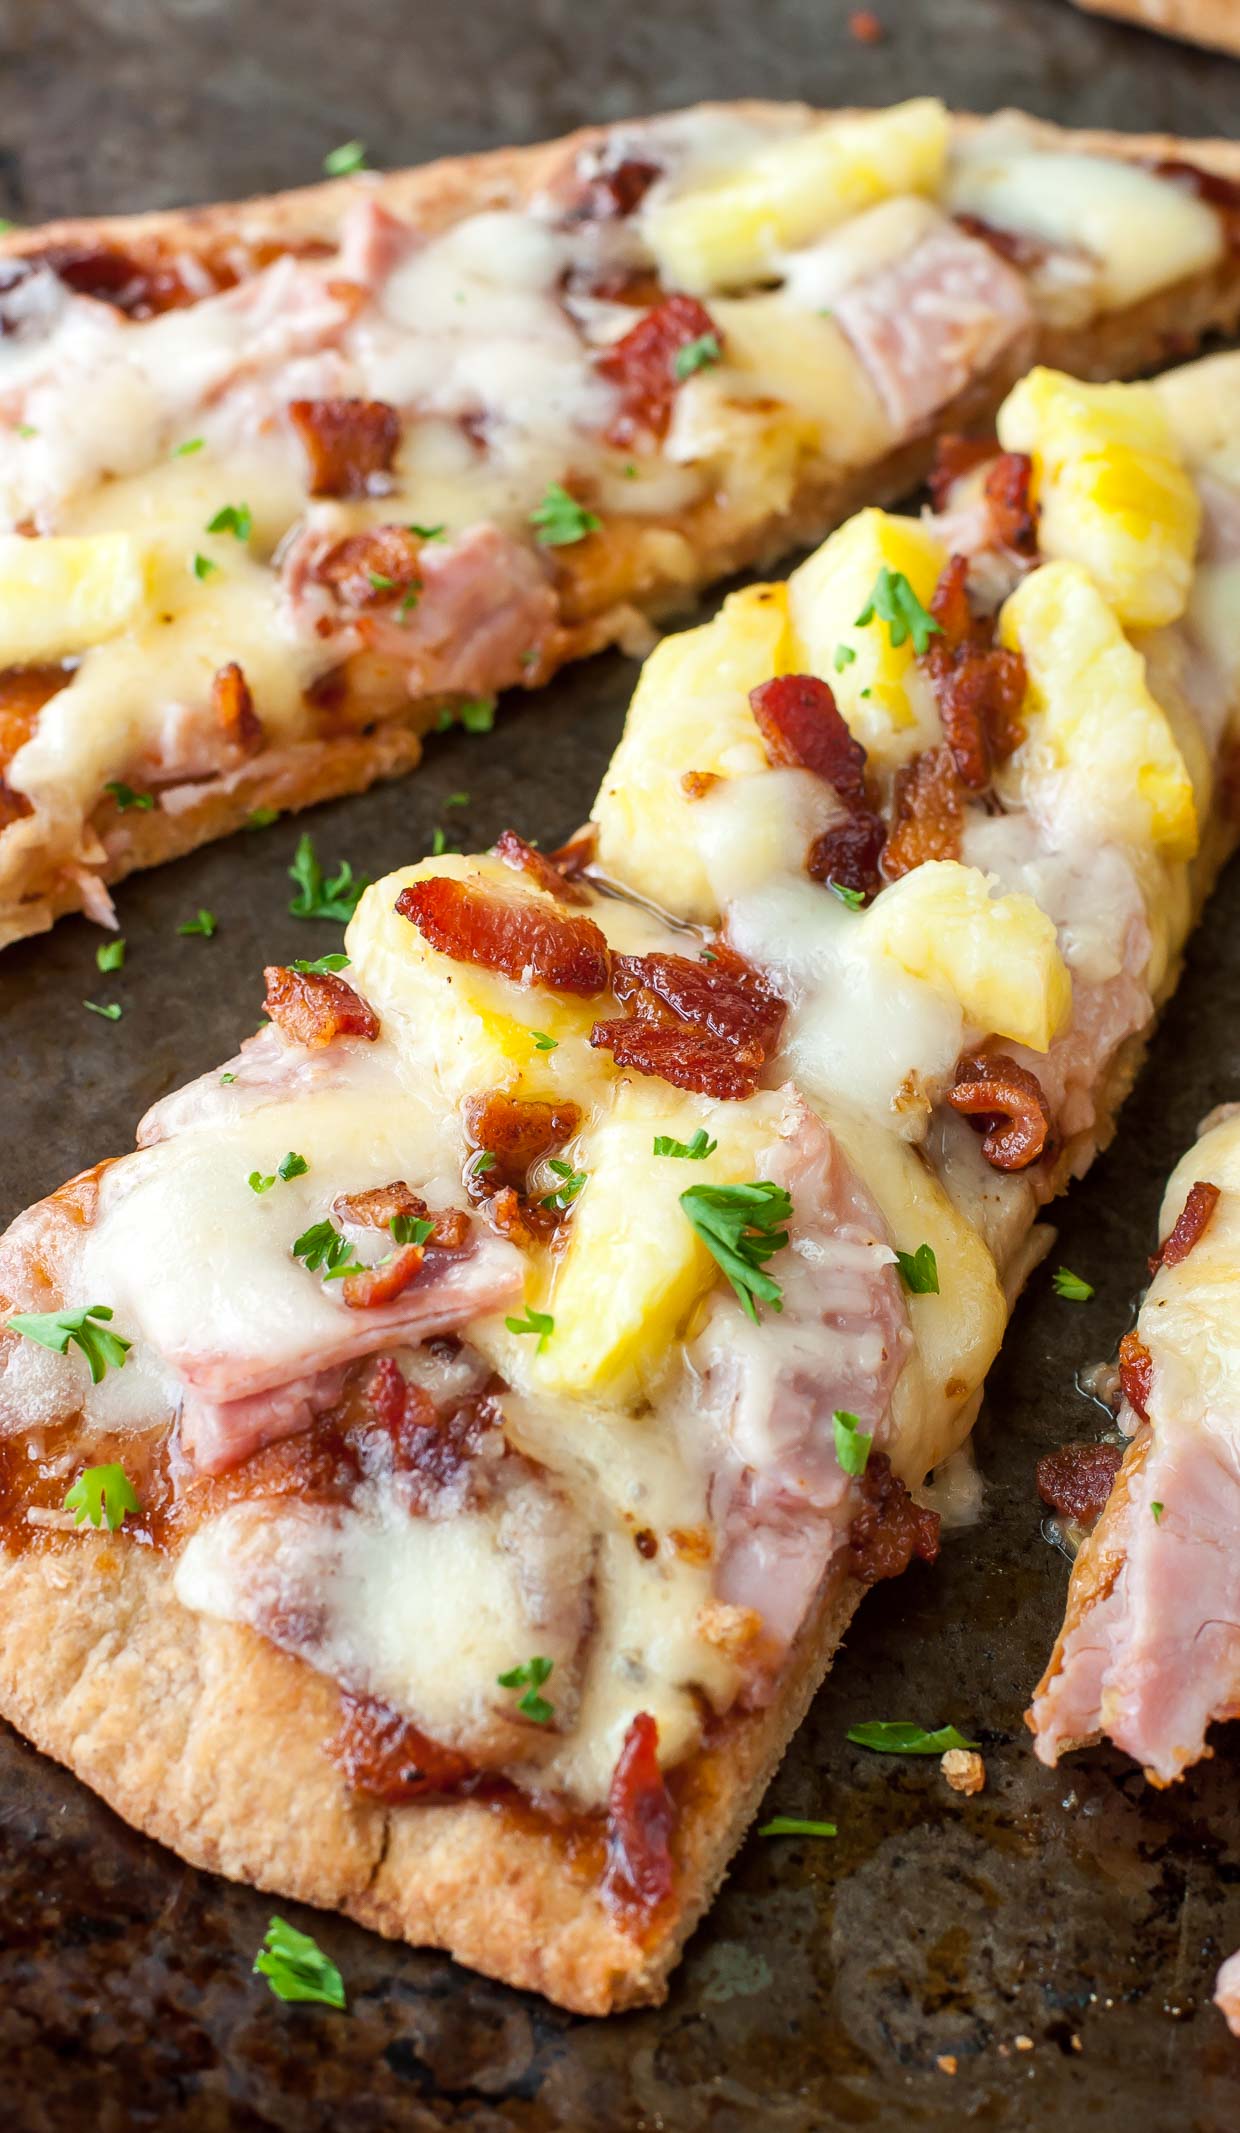 Put on your pizza pants and get your pizza fix with these 8 Easy Pizza Recipes! Gluten-Free, Vegetarian, and Low-Carb options available too! Hellooooo pizza night! :: The easiest way to make pizza for 1-2 people? Flatbreads! These BBQ Hawaiian Flatbread Pizzas are quick, easy, and totally delicious!